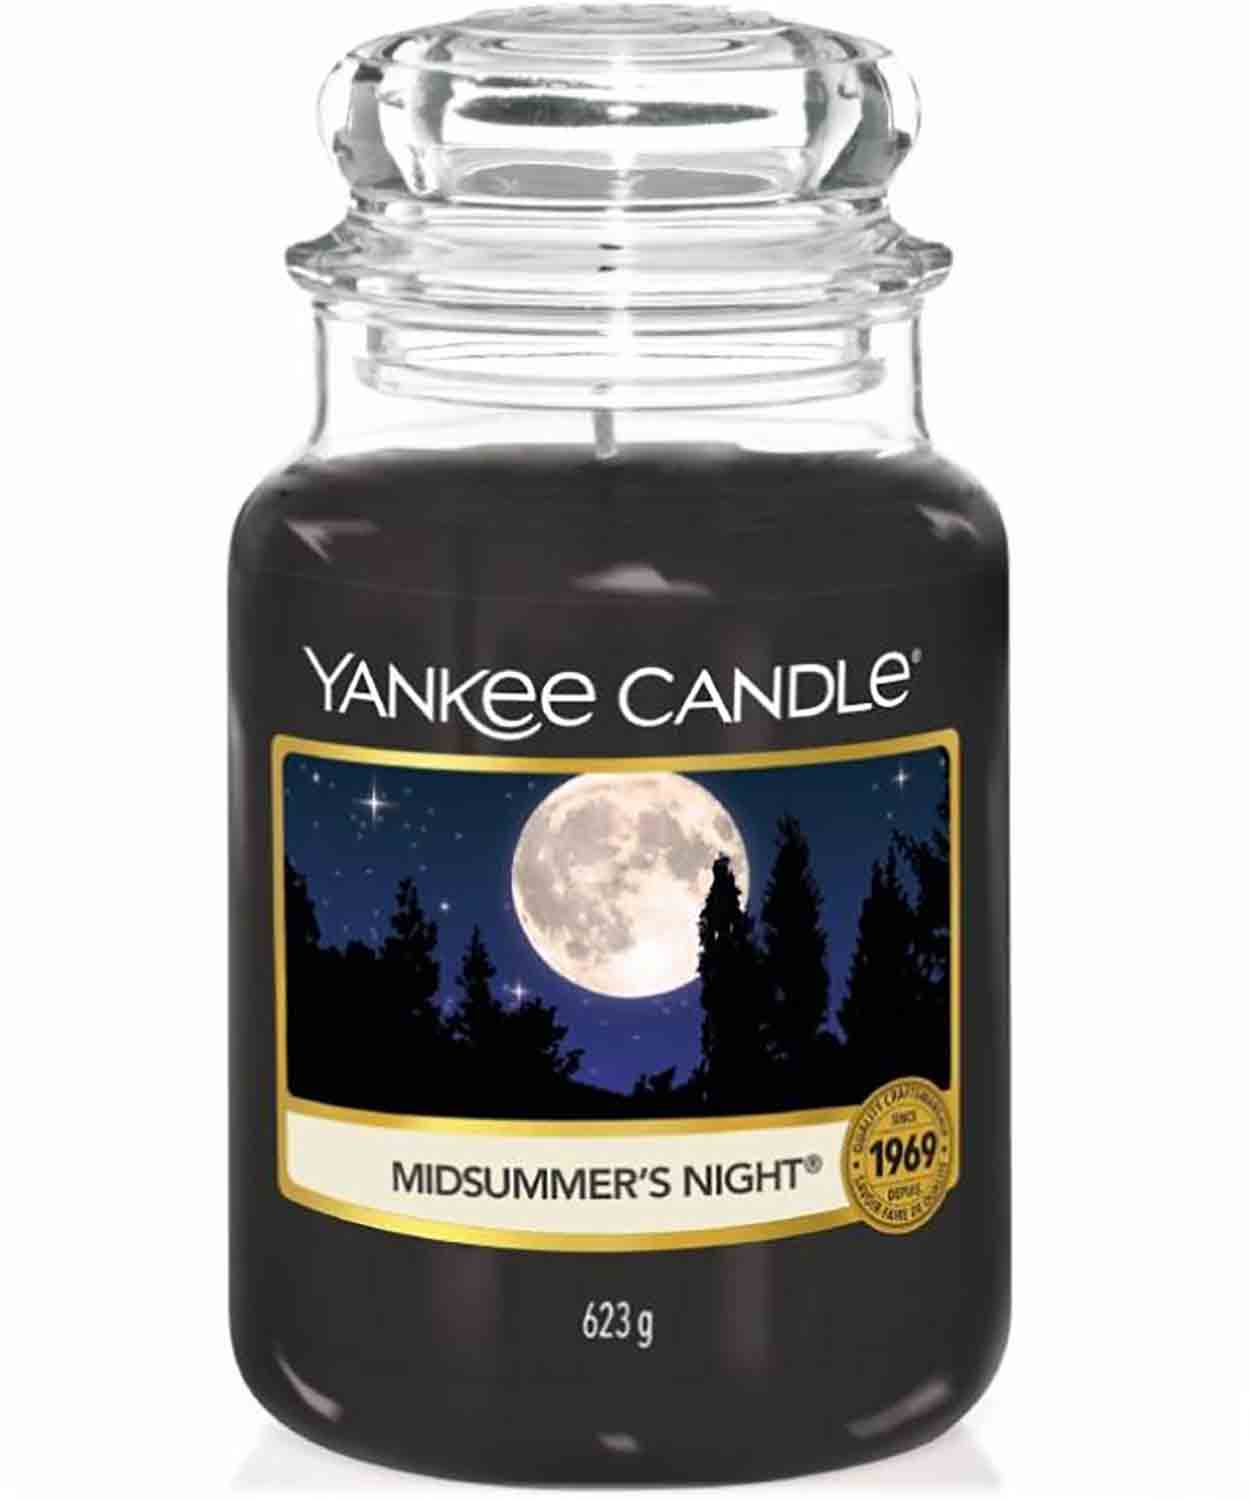 Yankee Candle Midsummer's Night 623g Assorted